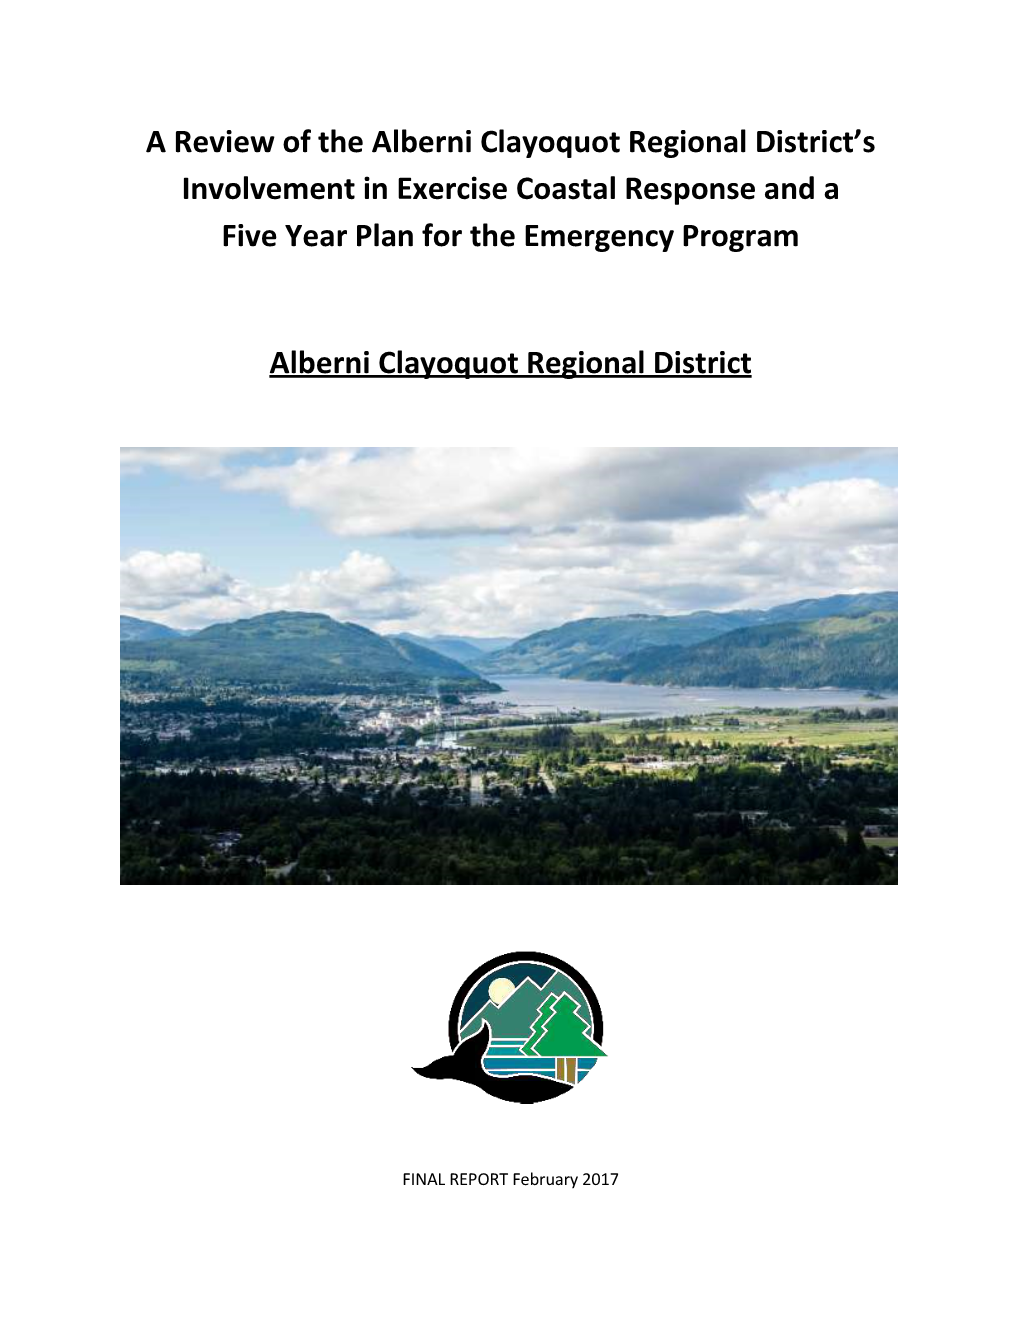 A Review of the Alberni Clayoquot Regional District's Involvement In